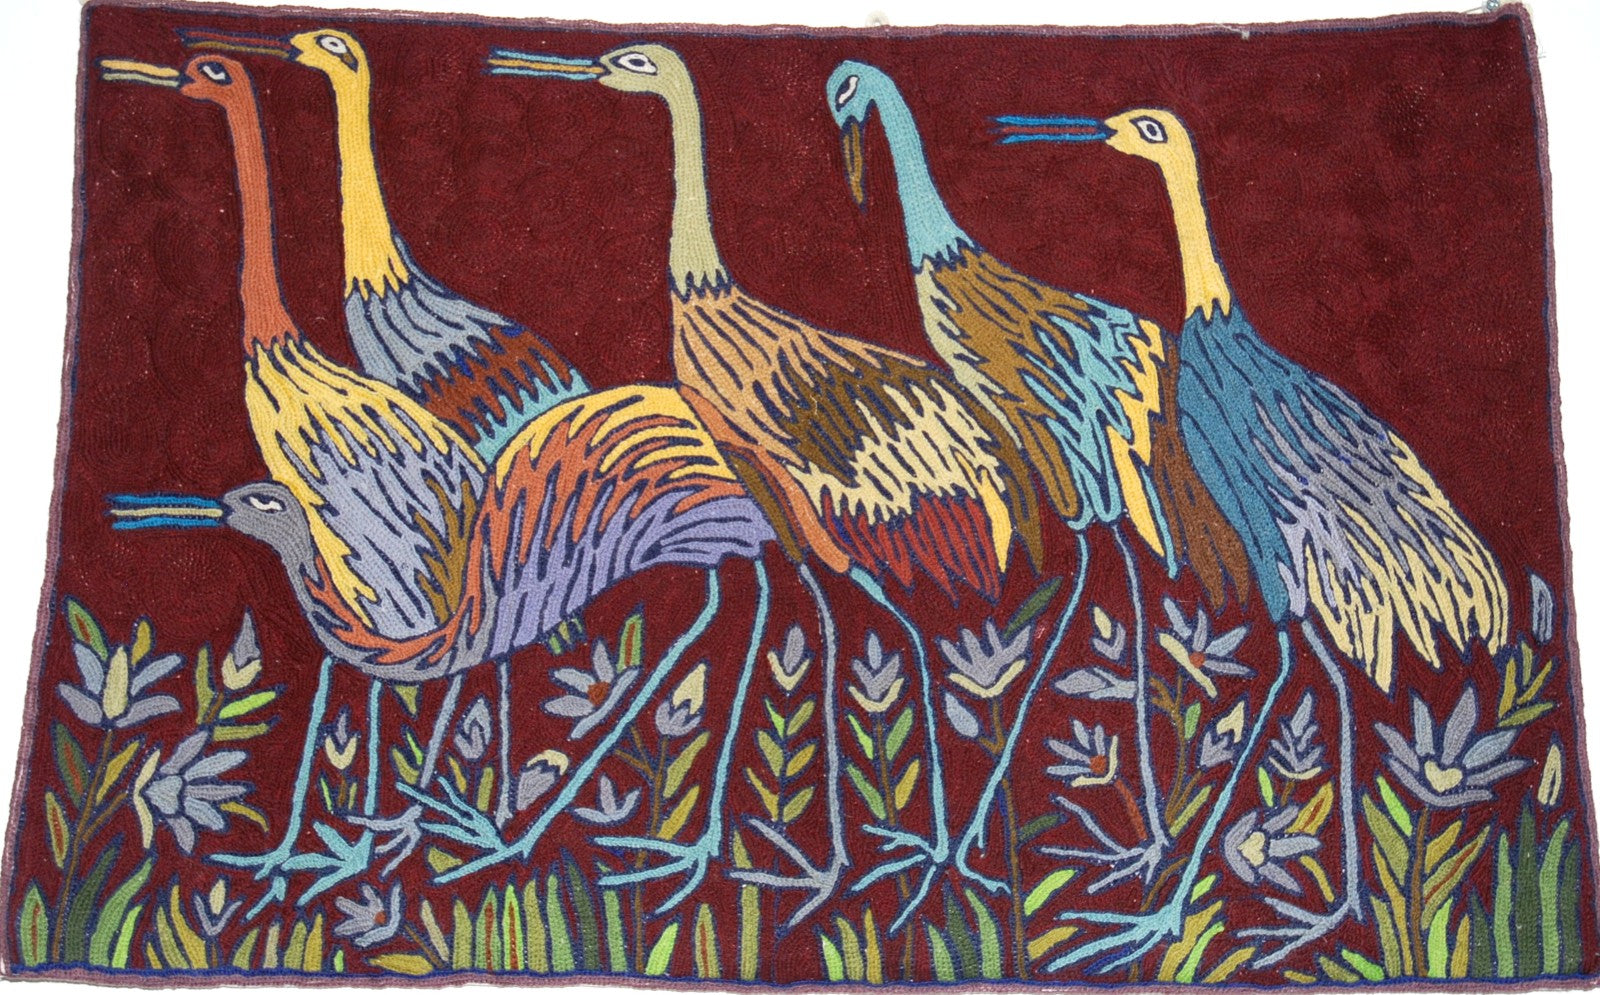 ChainStitch Tapestry Woolen Area Rug Birds, Multicolor Embroidery 2x3 feet #CWR6103